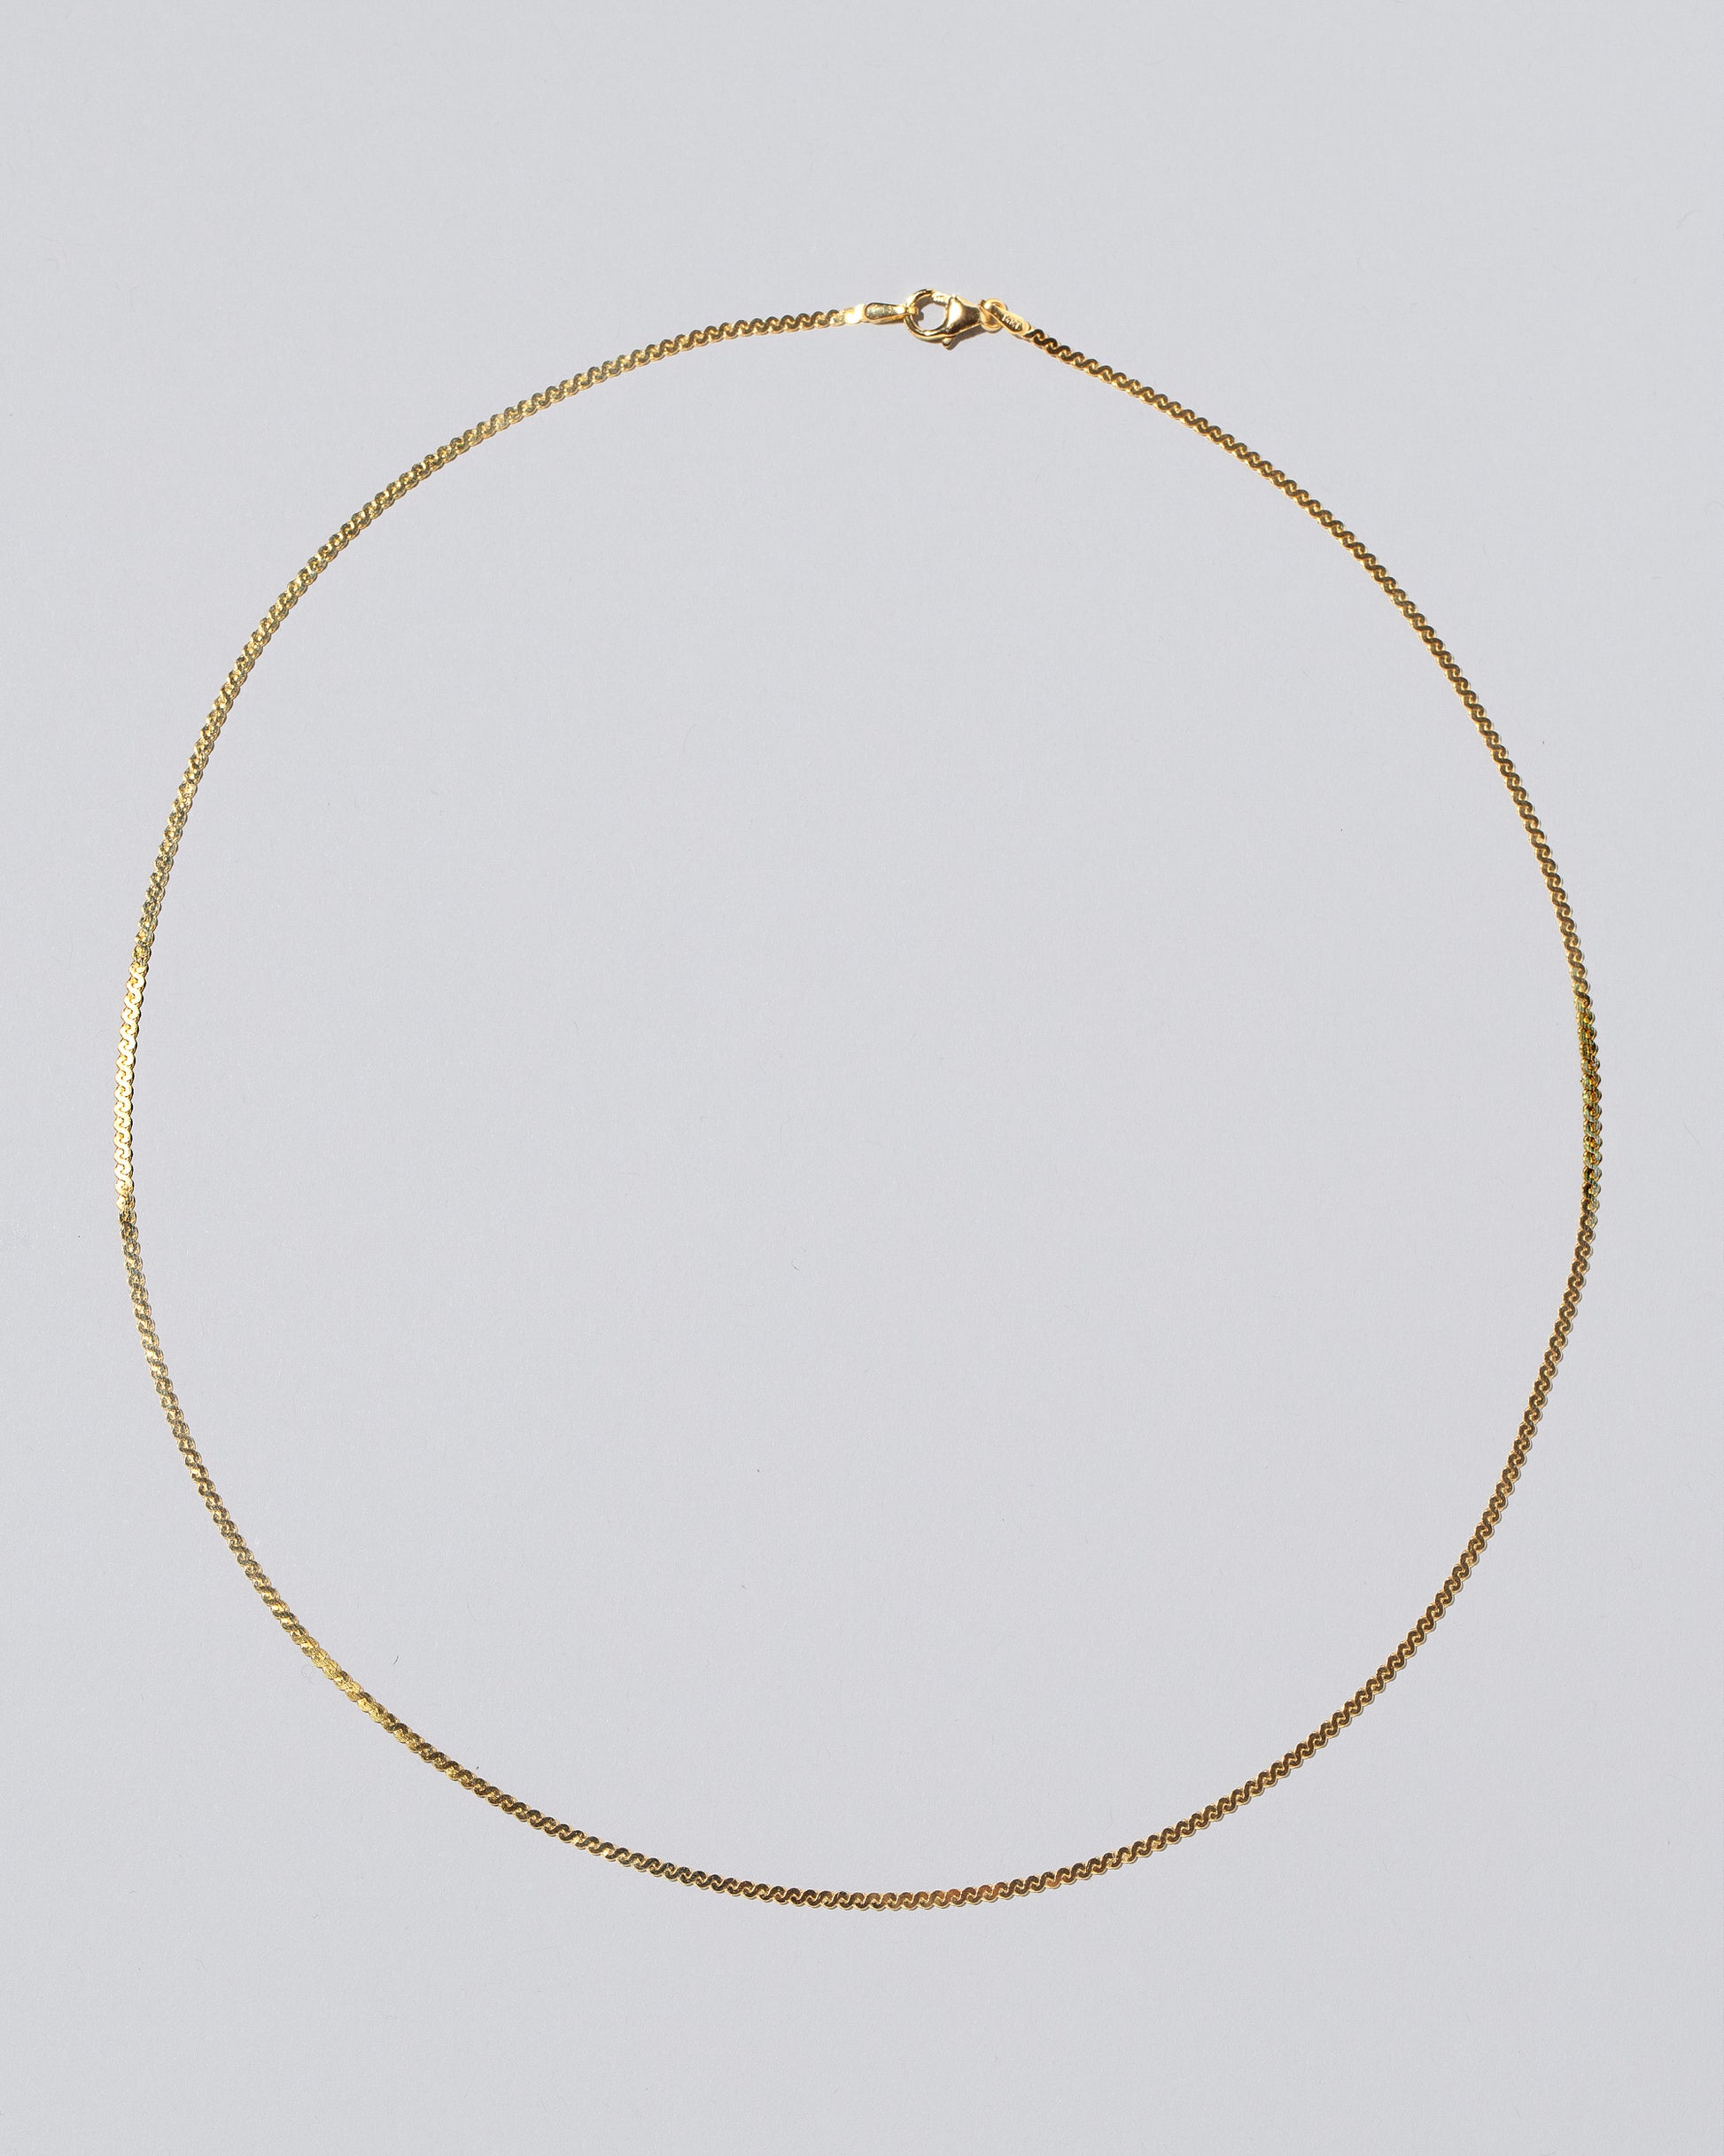 Yellow Gold Serpentina Chain Necklace on light color background.